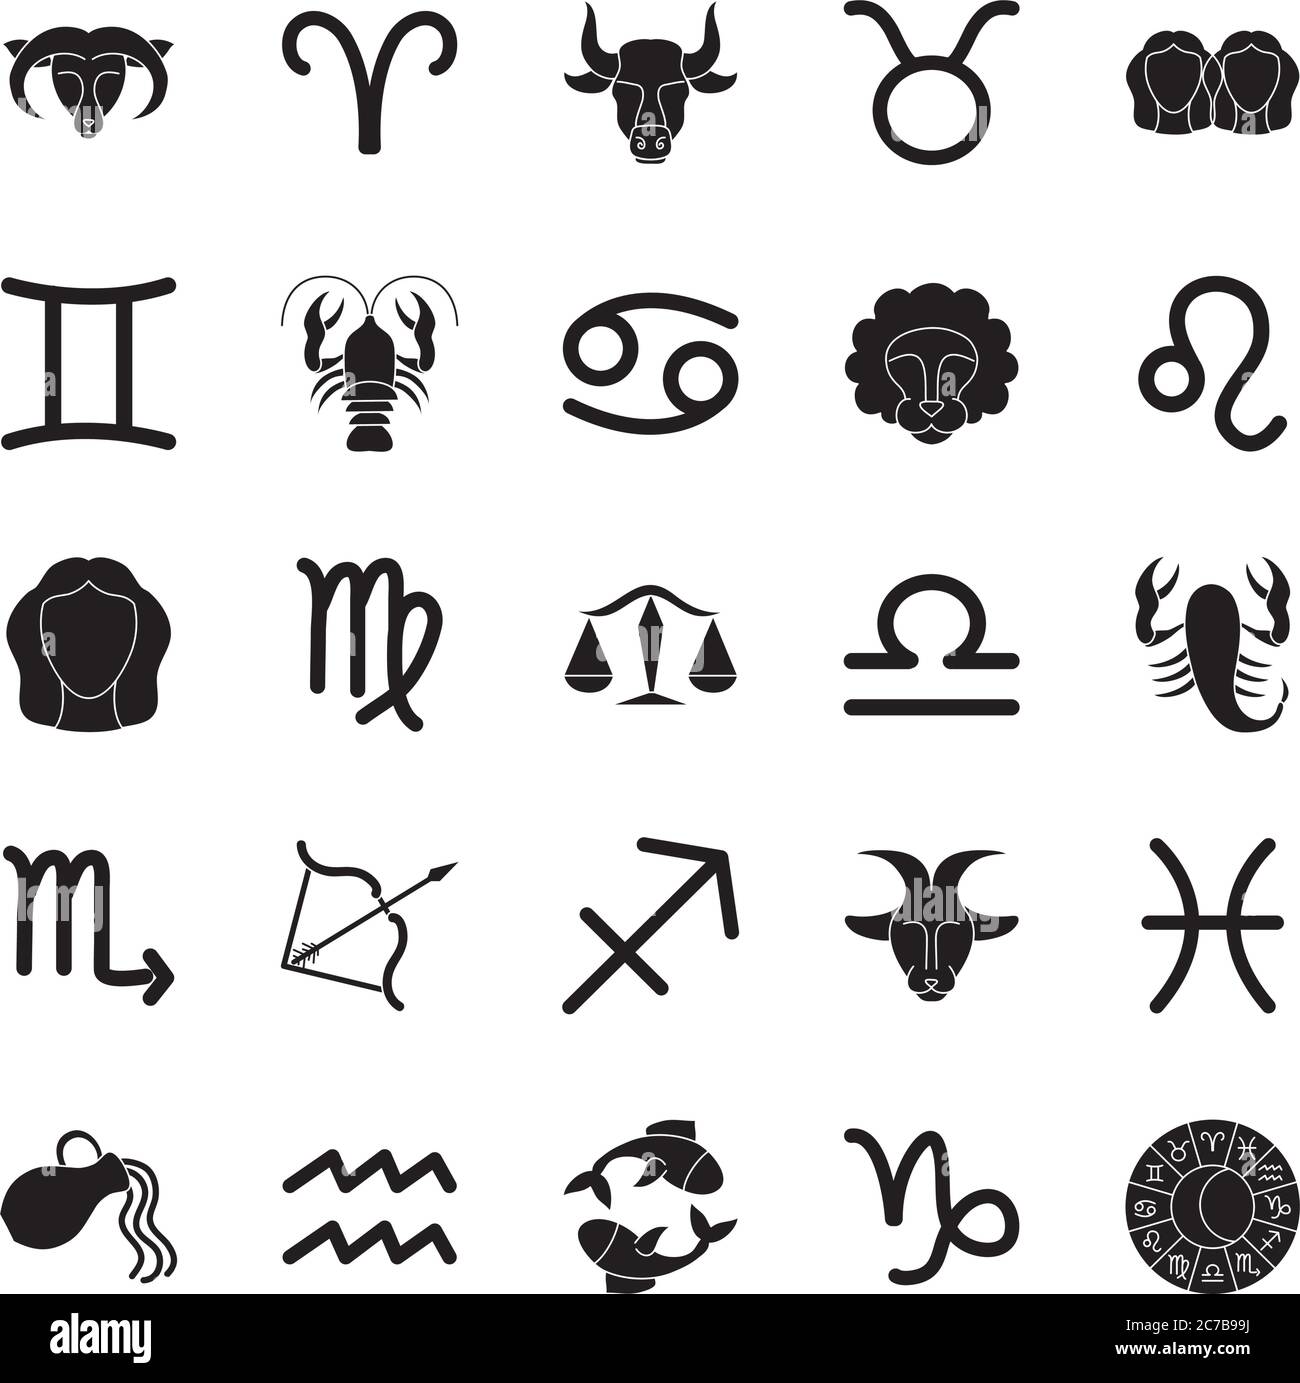 astrology signs and symbols icon set over white background, silhouette style, vector illustration Stock Vector